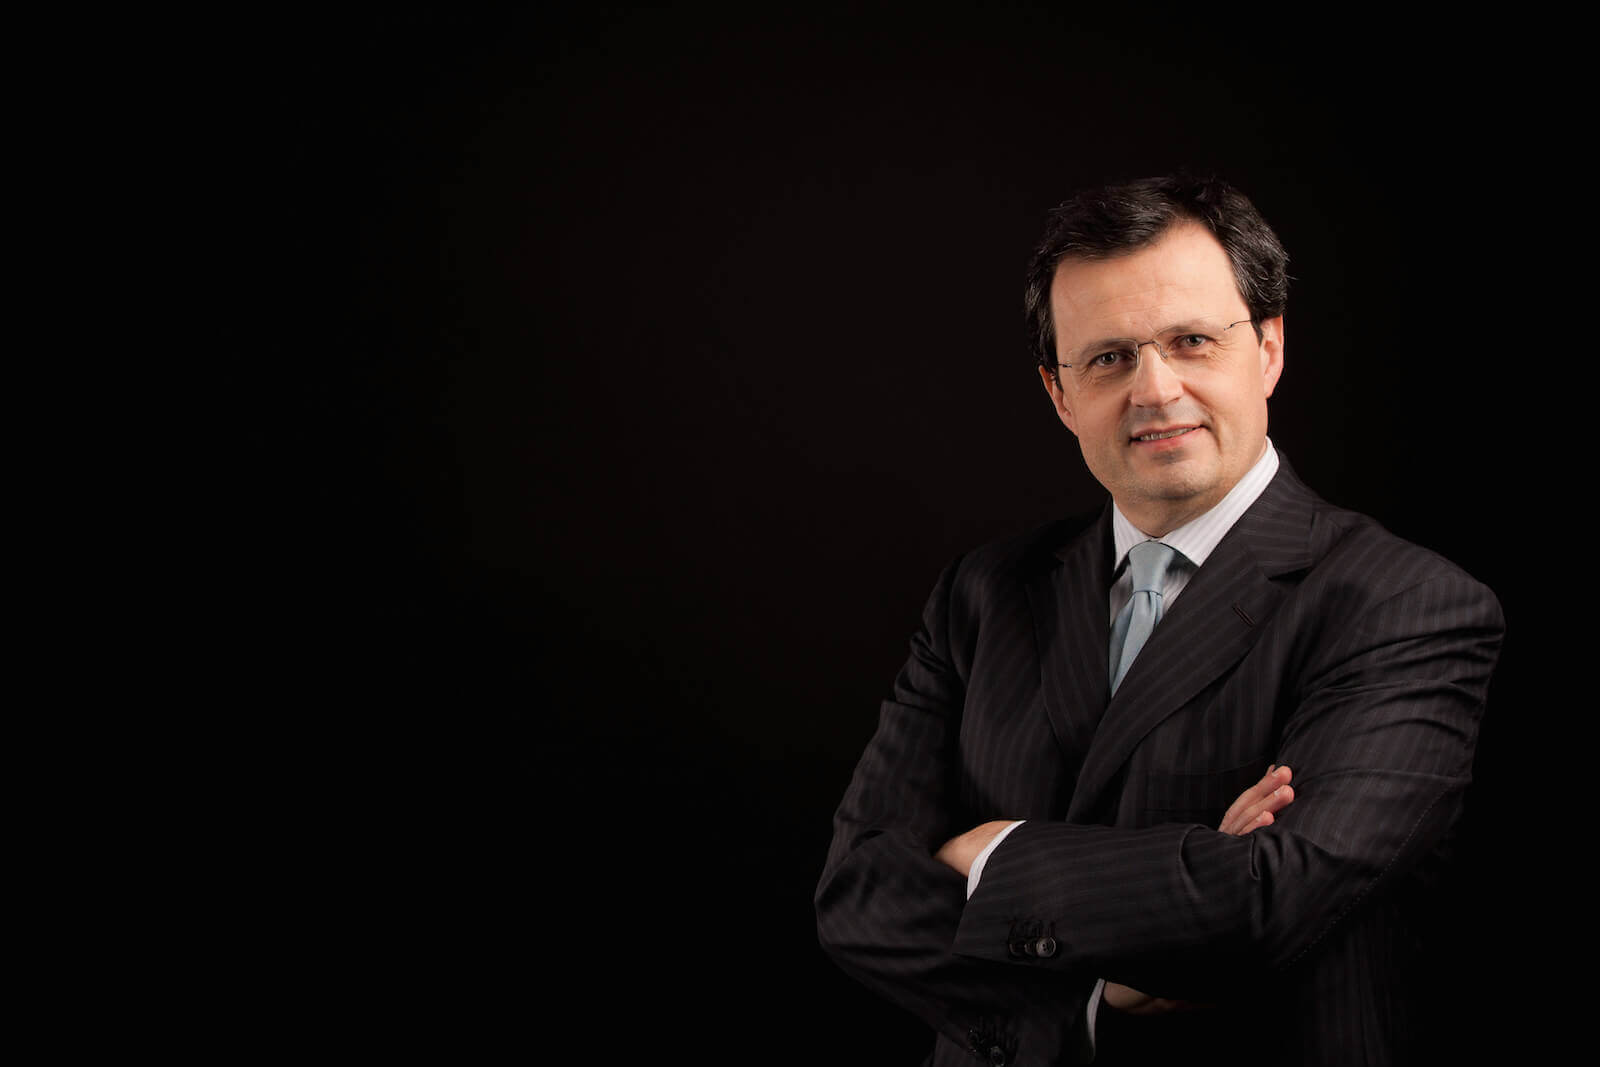 Interview with Prof. Guido Corbetta, Professor of Strategic Management in Family Business